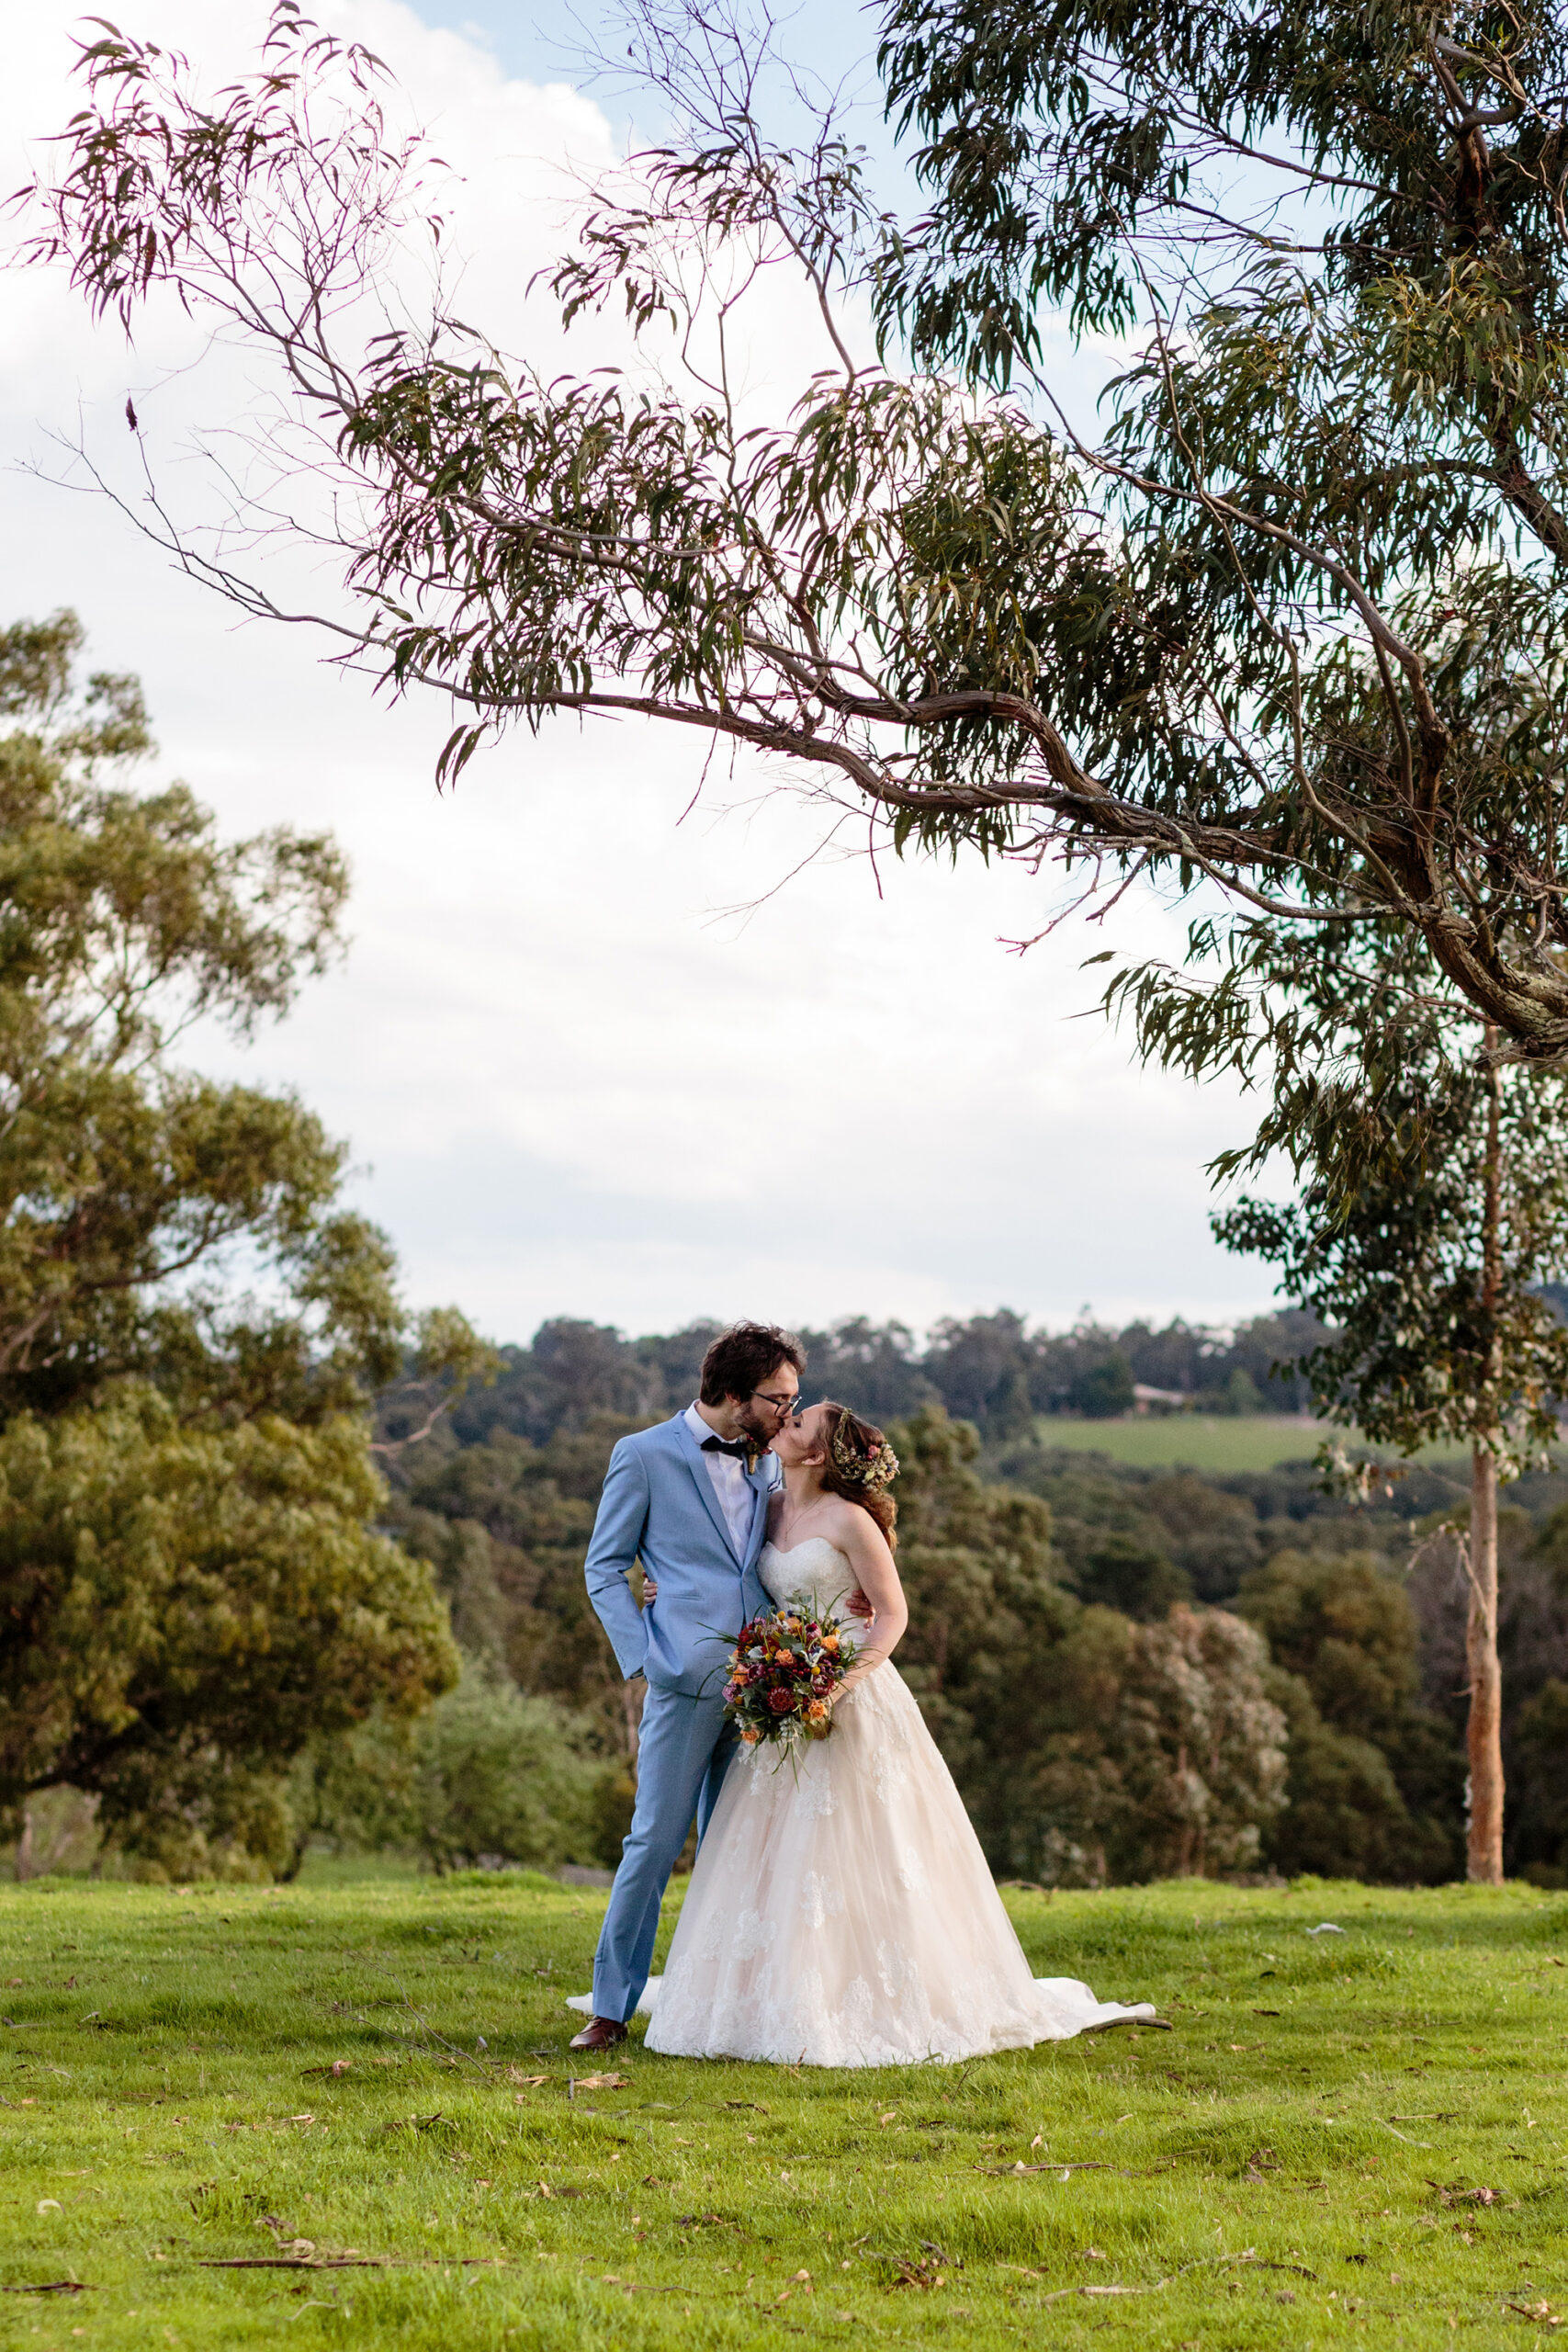 Stacey_Andrew_Rustic-Farm-Wedding_Alan-Rogers-Photography_SBS_016